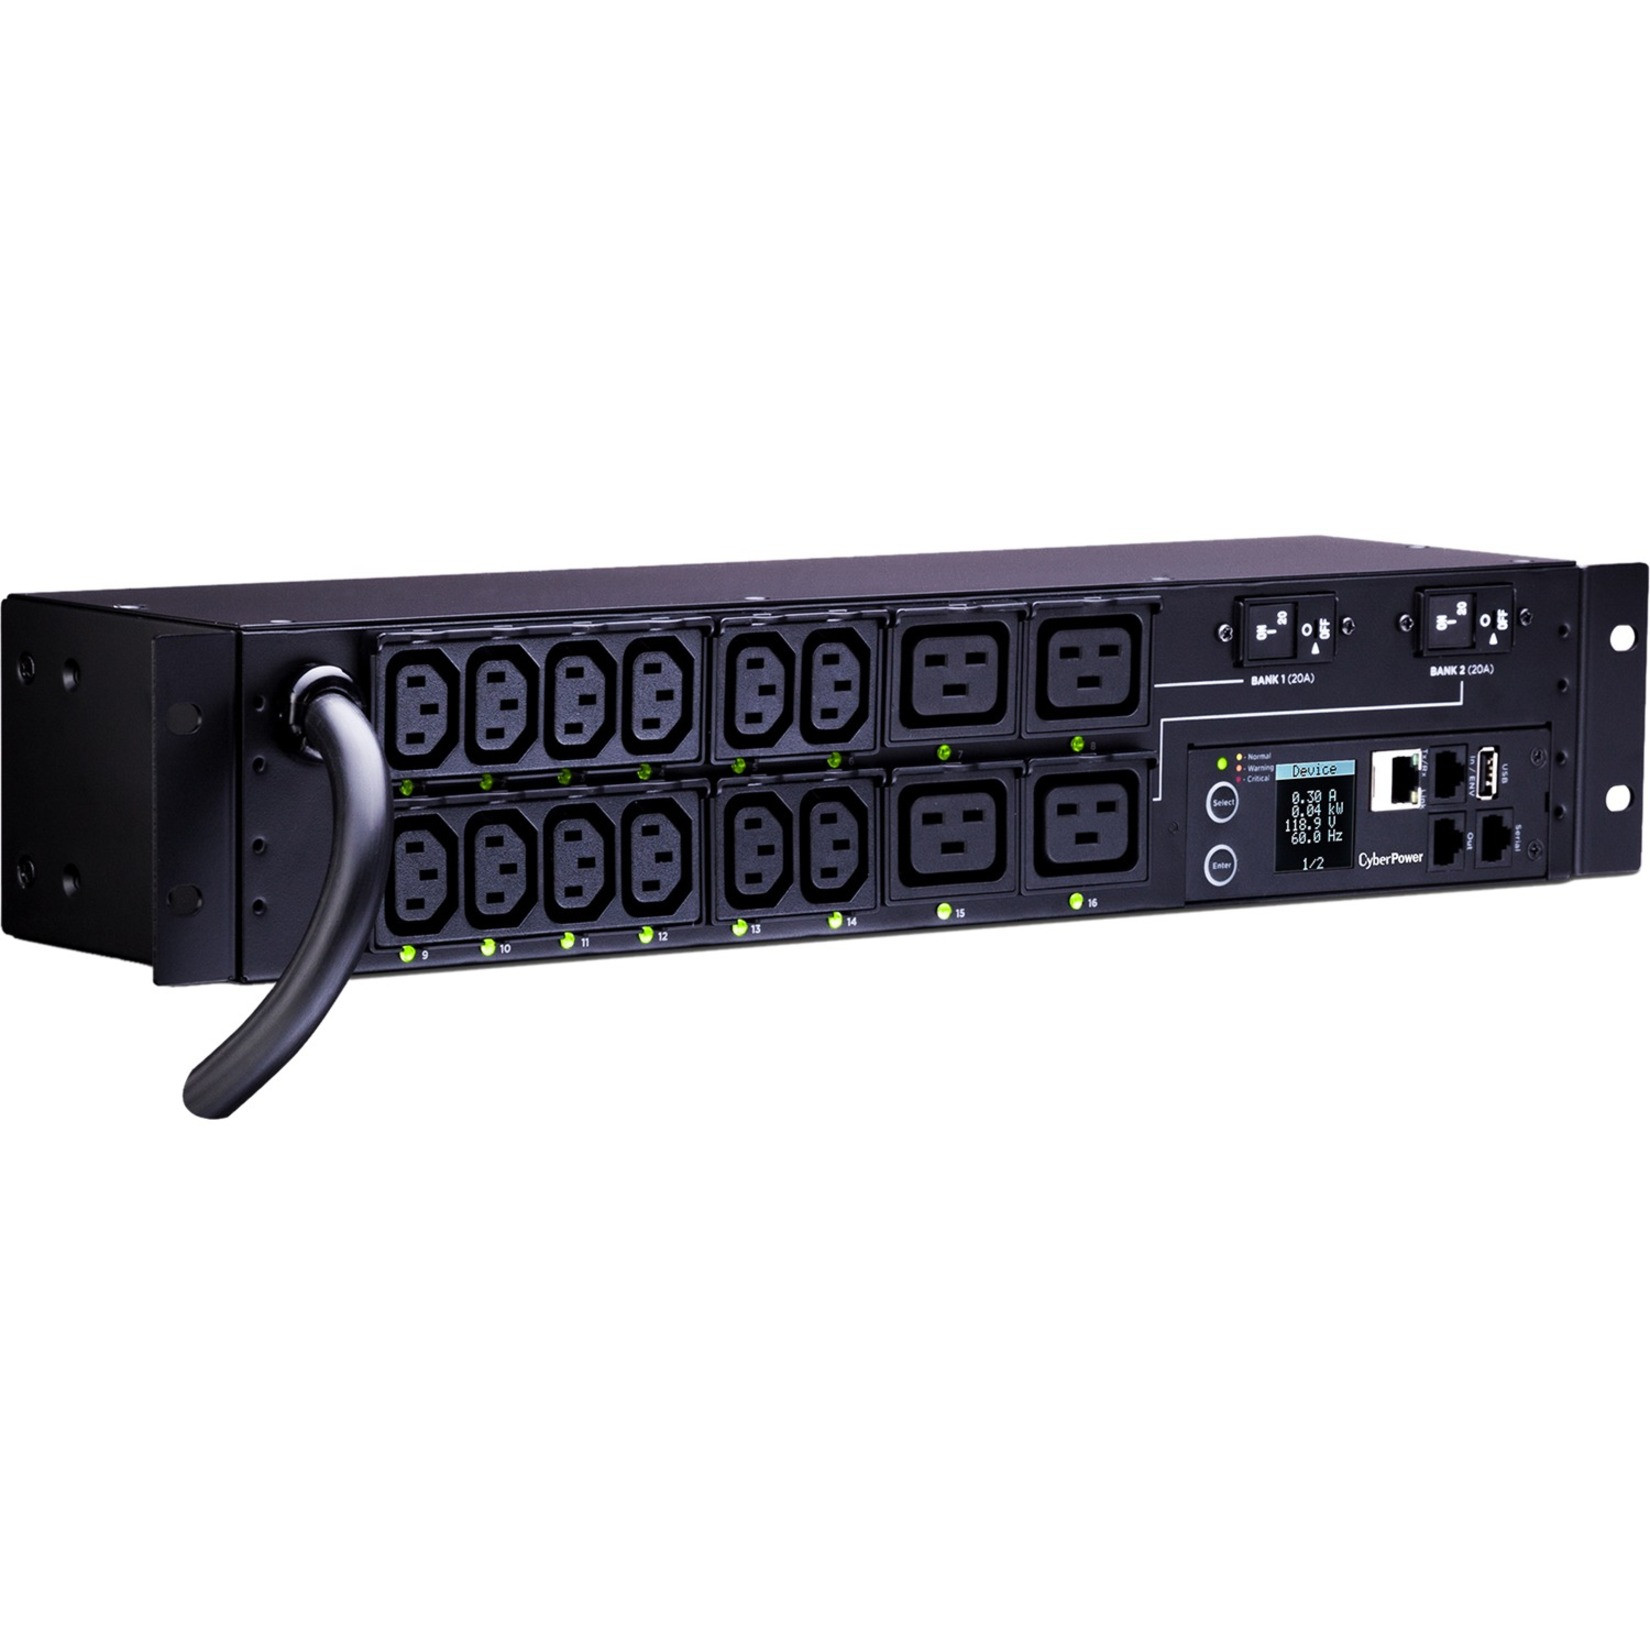 Cyber Power PDU81008 200240 VAC 30A Switched Metered-by-Outlet PDU16 Outlets, 12 ft, NEMA L6-30P, Horizontal, 2U, LCD,  Warranty PDU81008